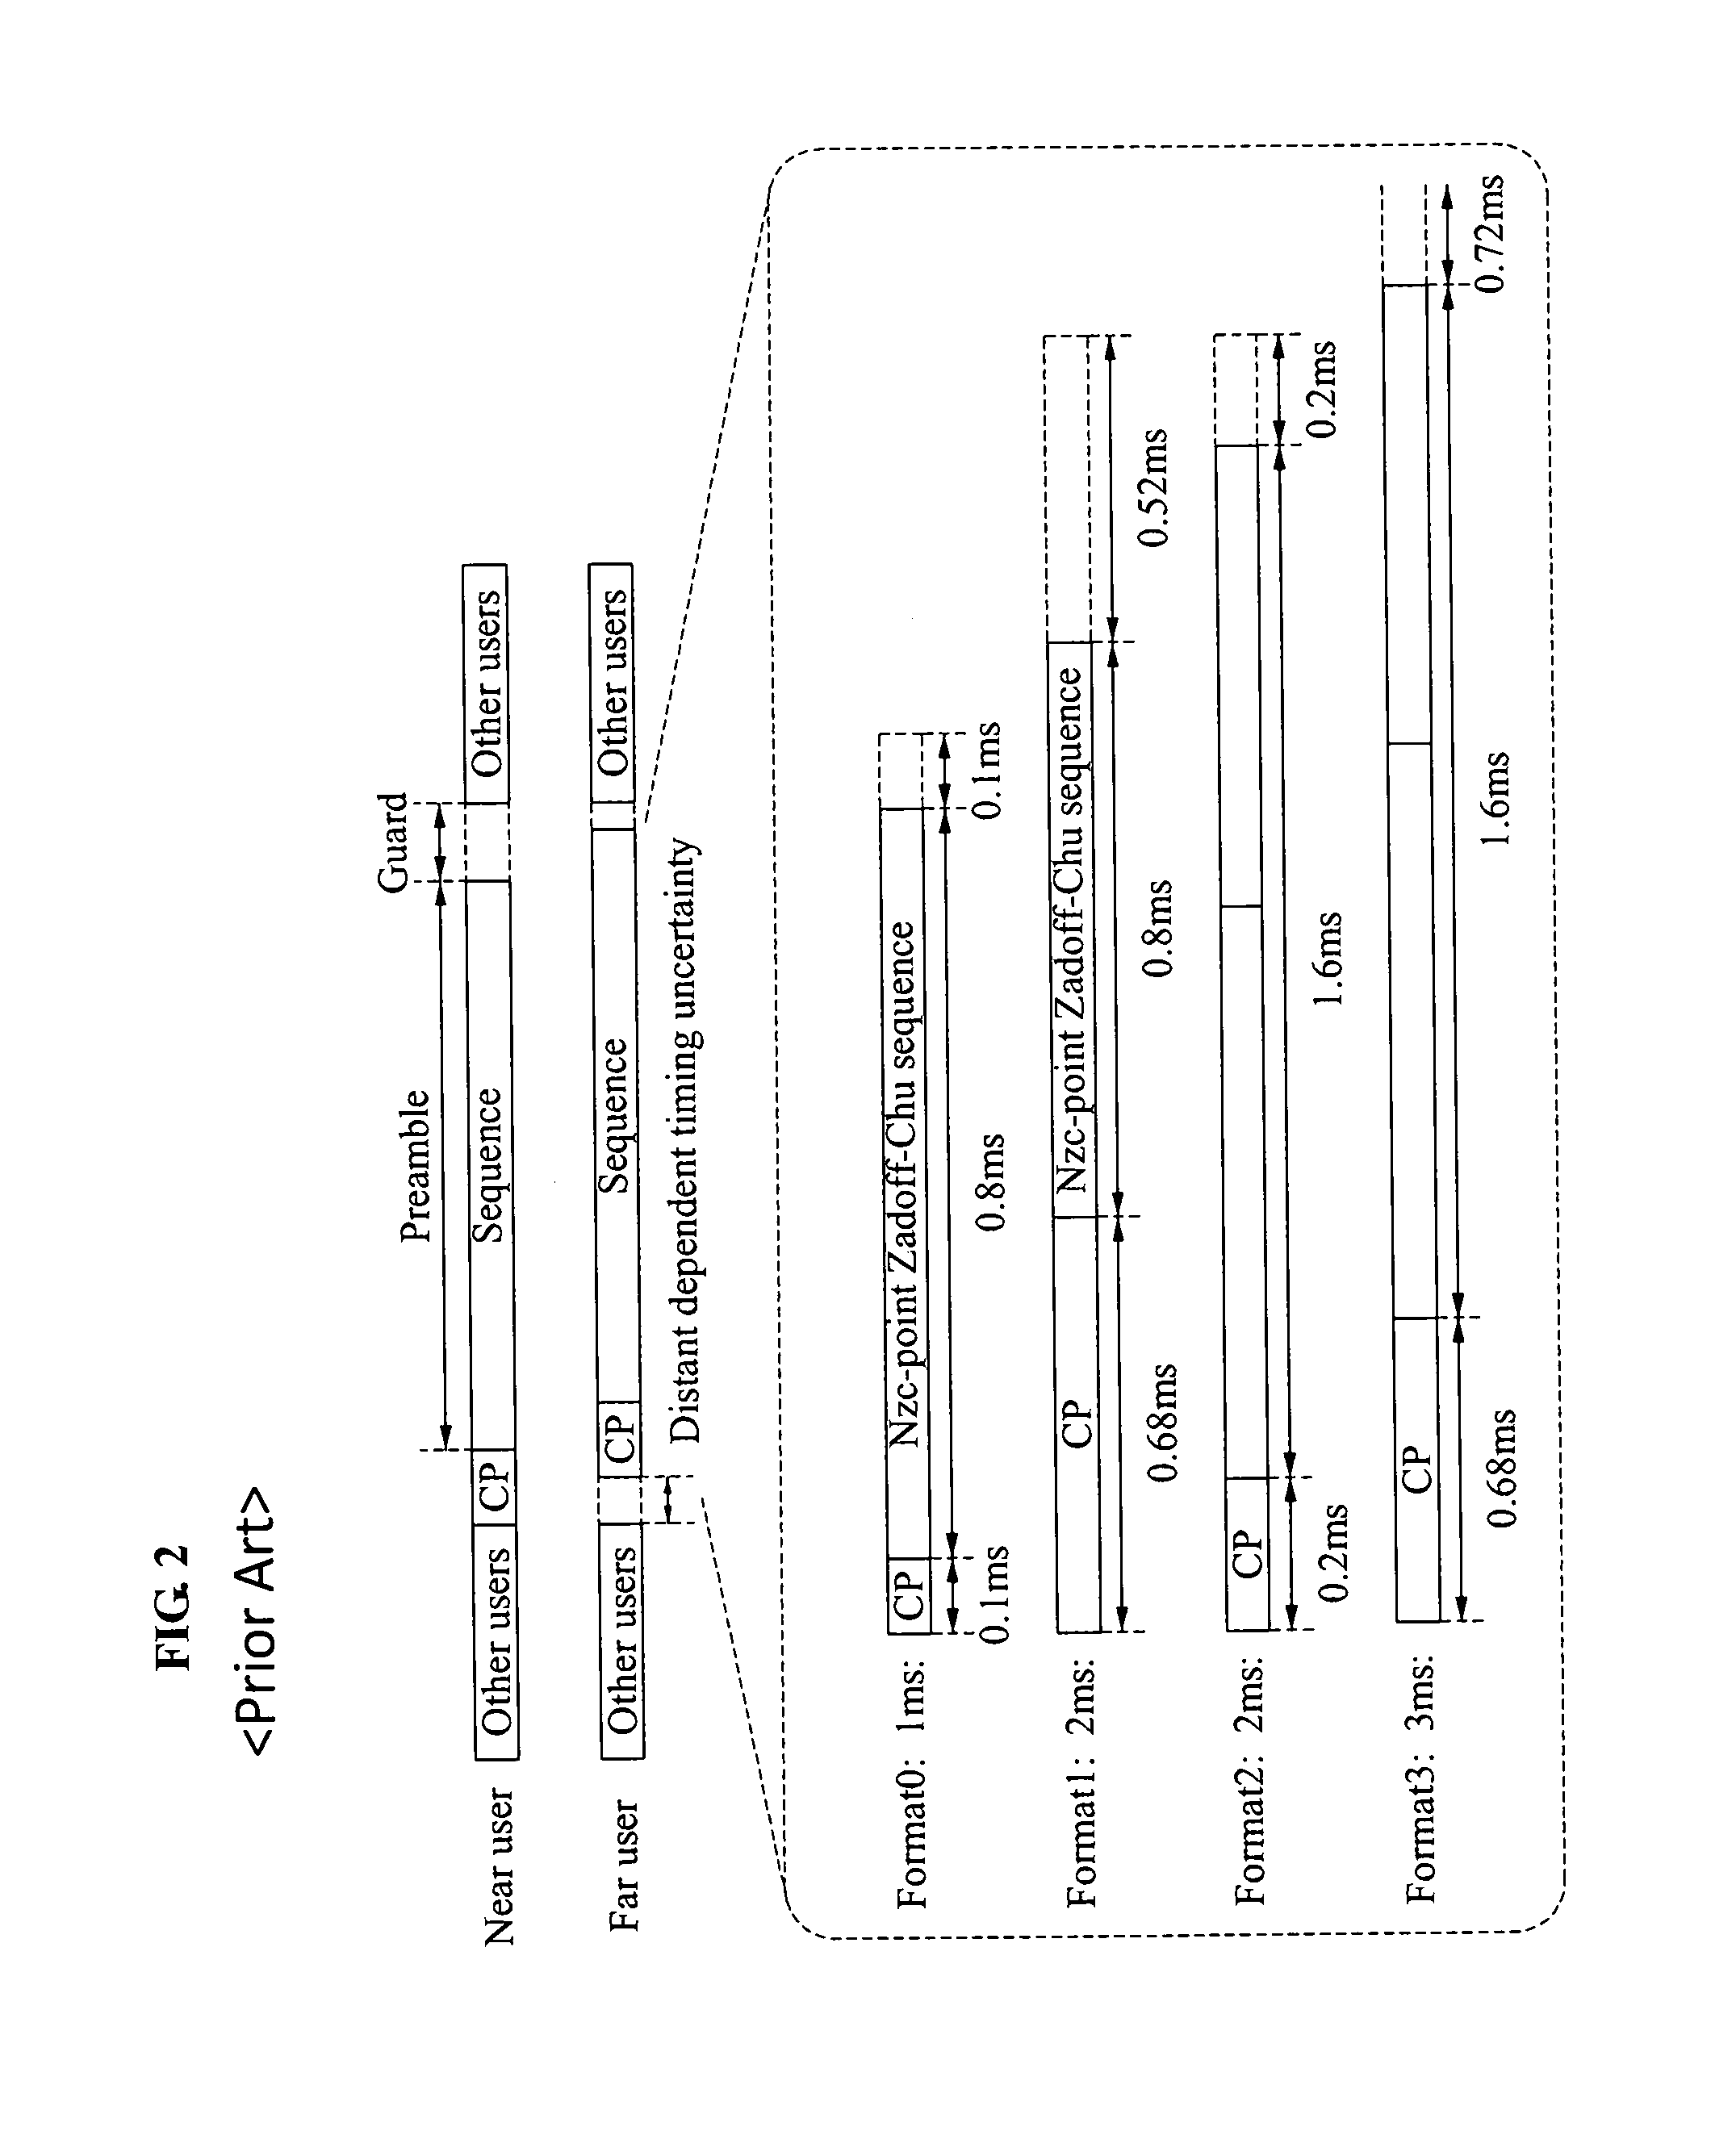 Random access method and random access channel structure in mobile communication system having large cell radius